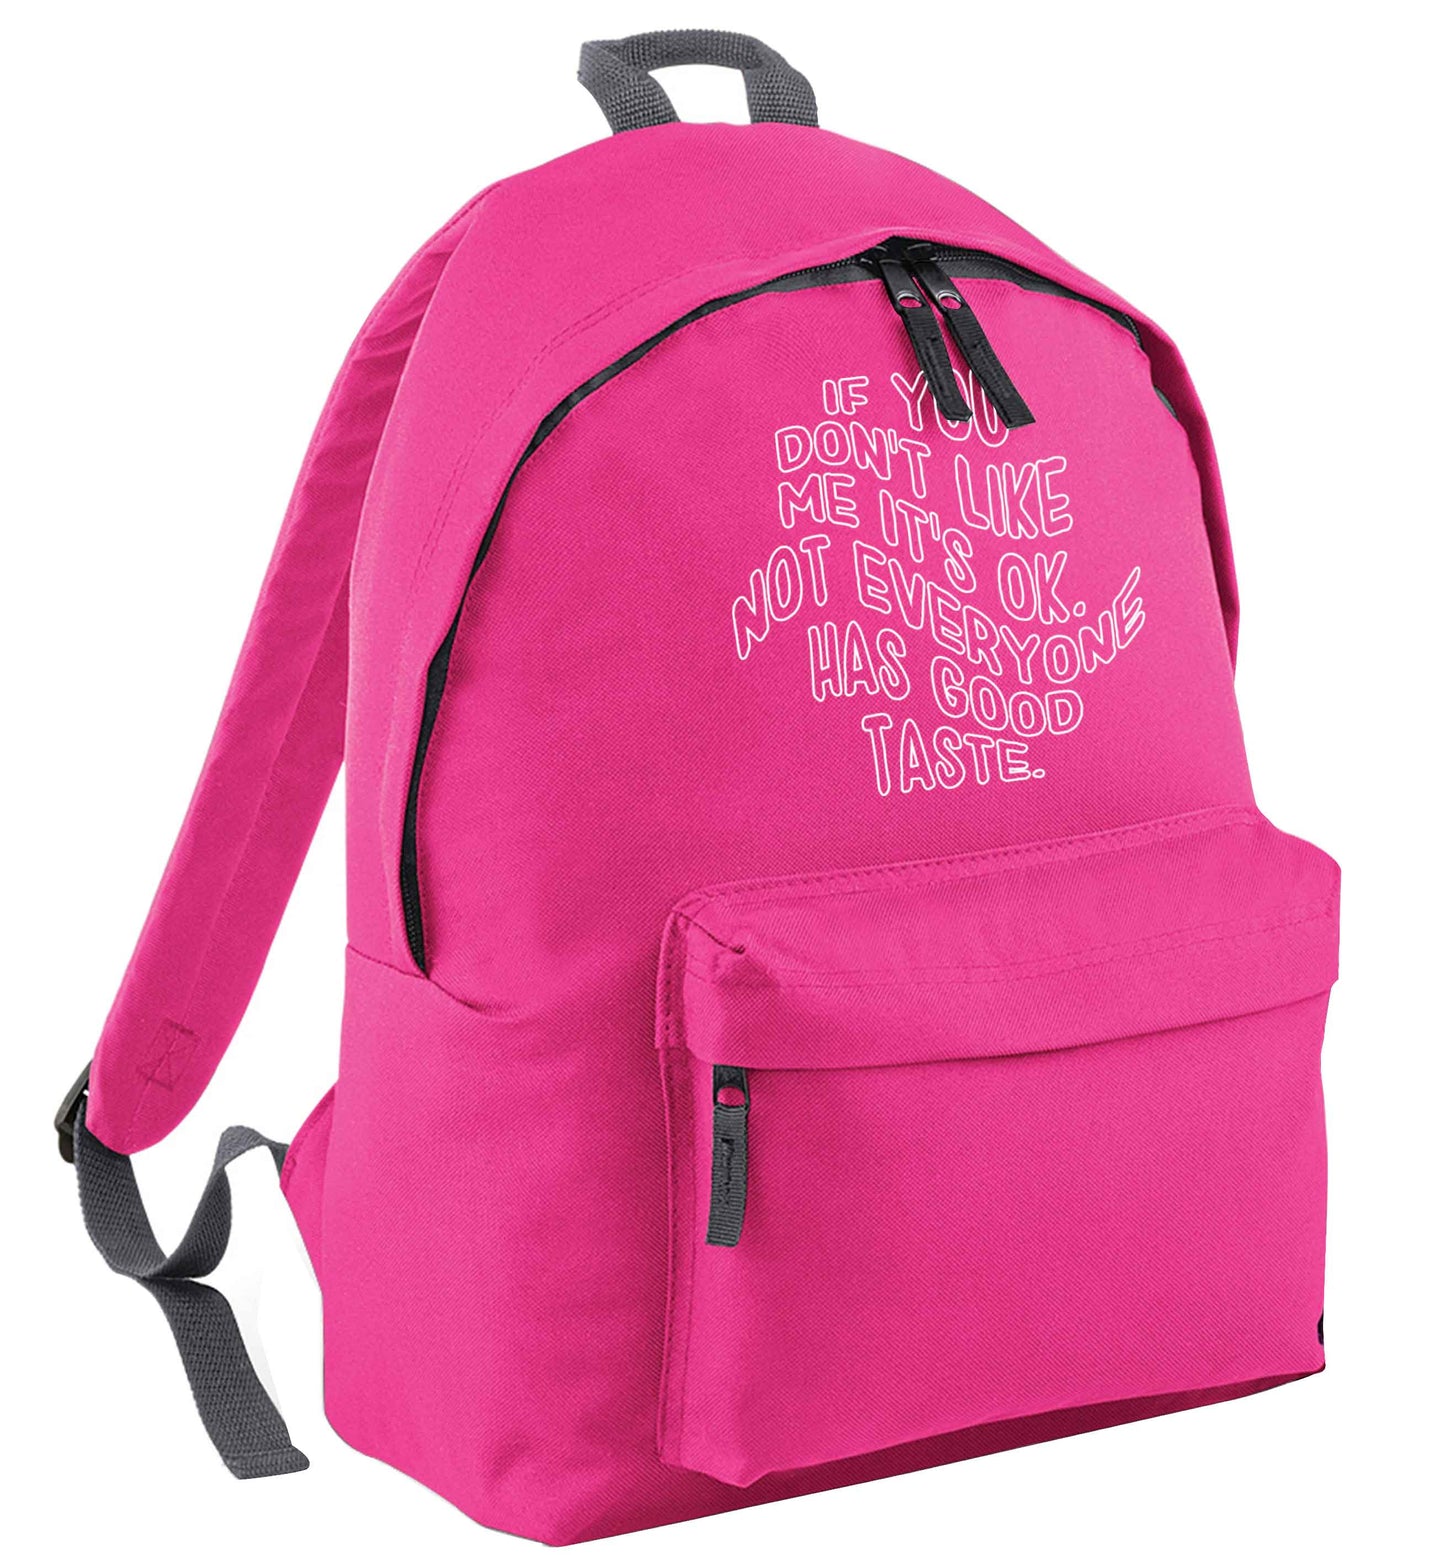 If you don't like me it's ok not everyone has good taste pink adults backpack